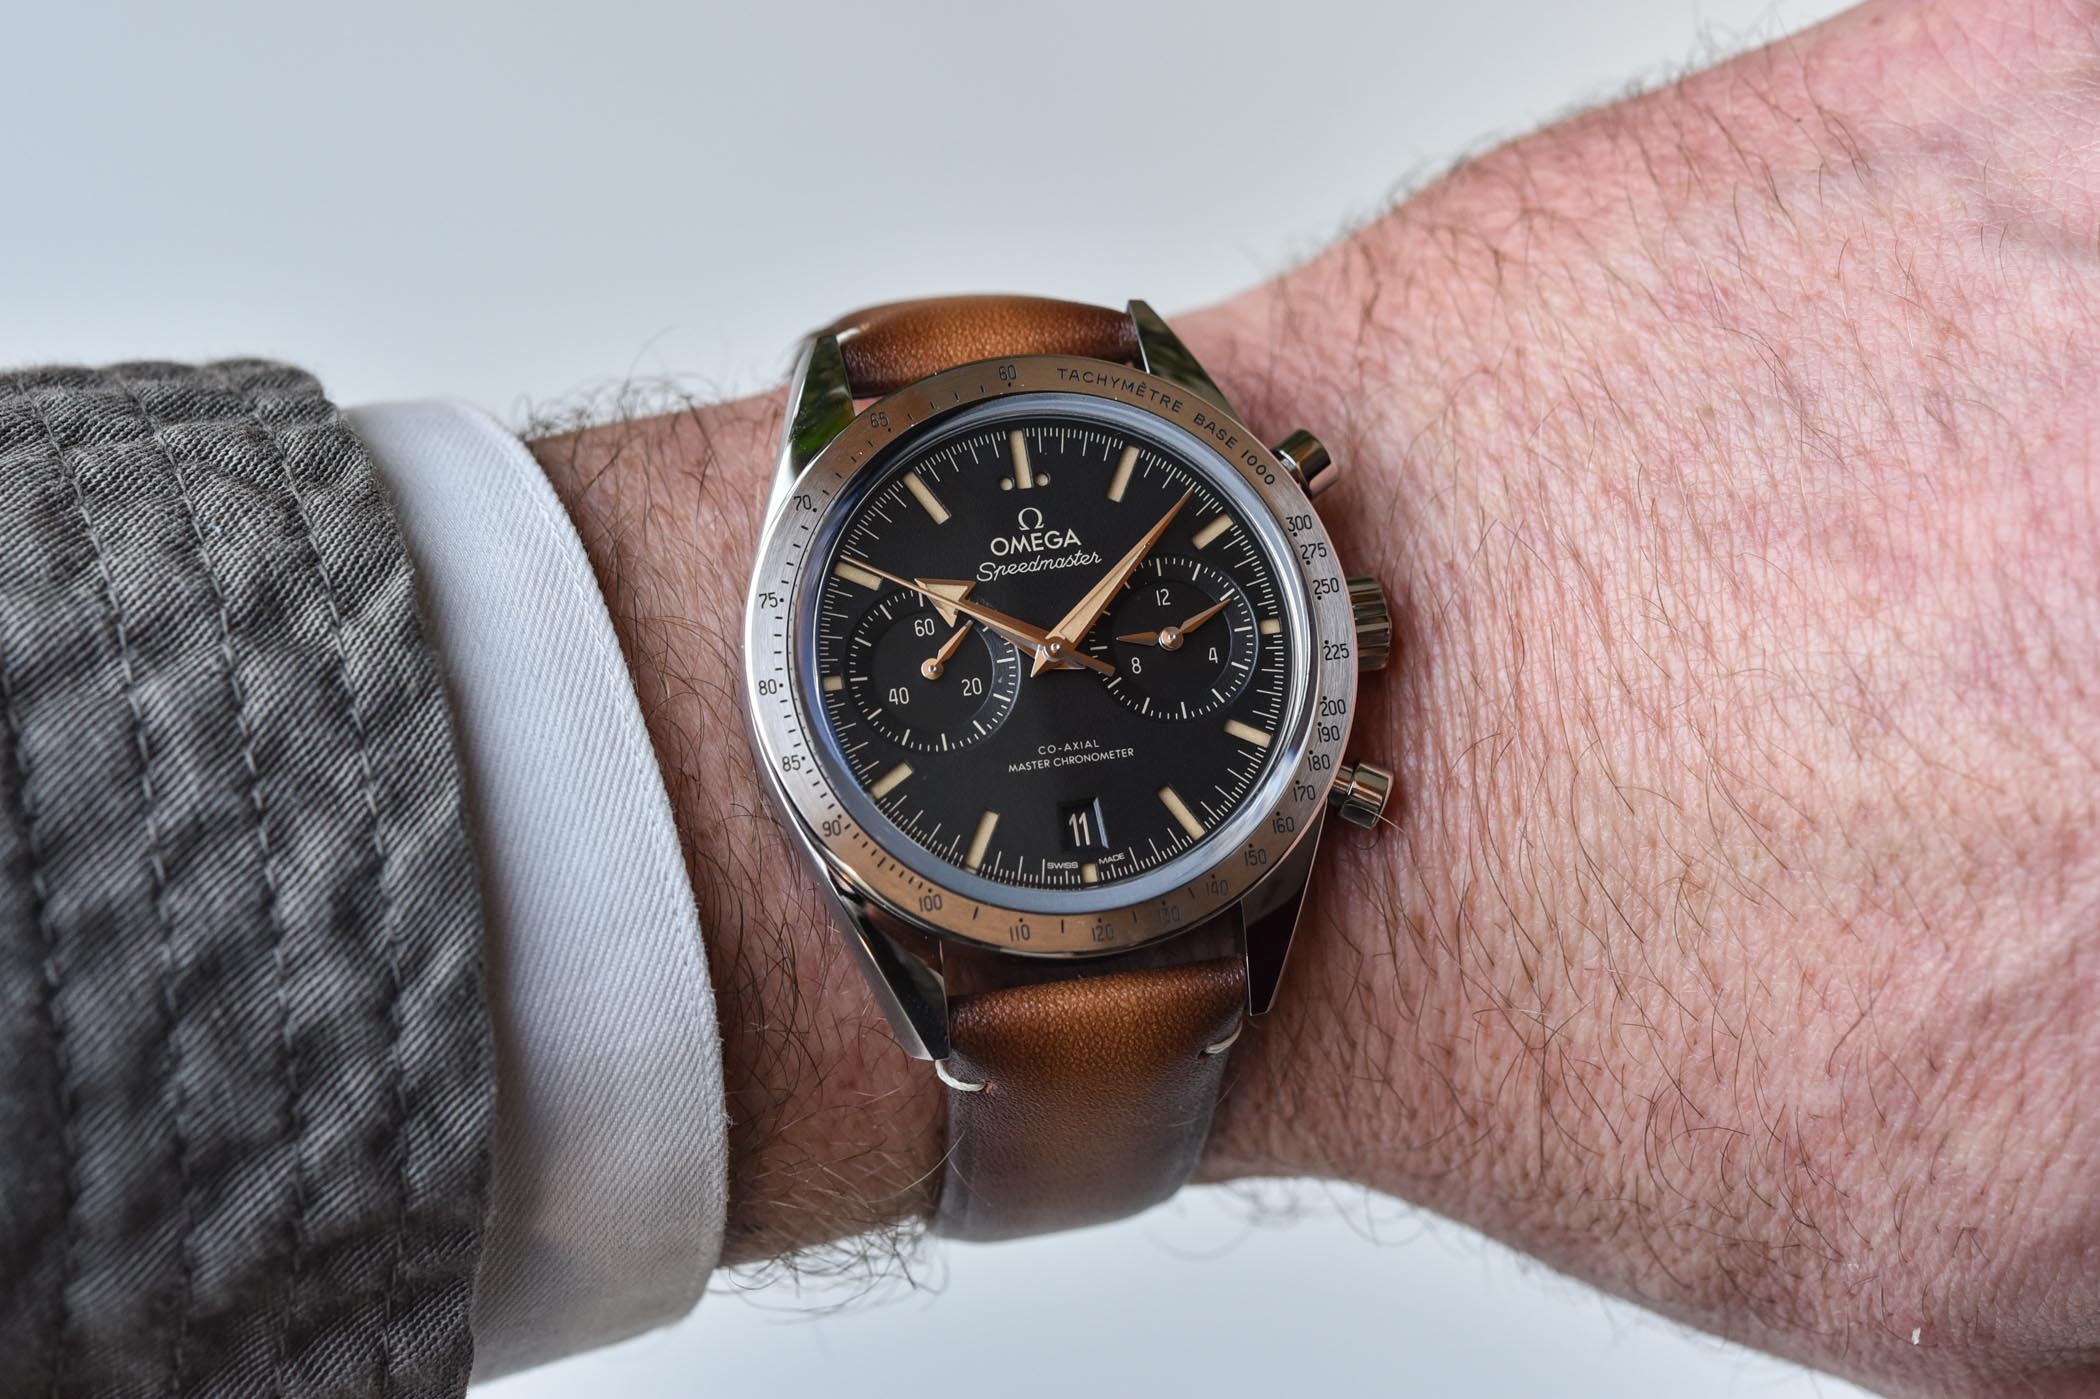 Omega Speedmaster 57 Chronograph Hand-Wound 40.5mm 332.12.41.51.01.001 - review - 7